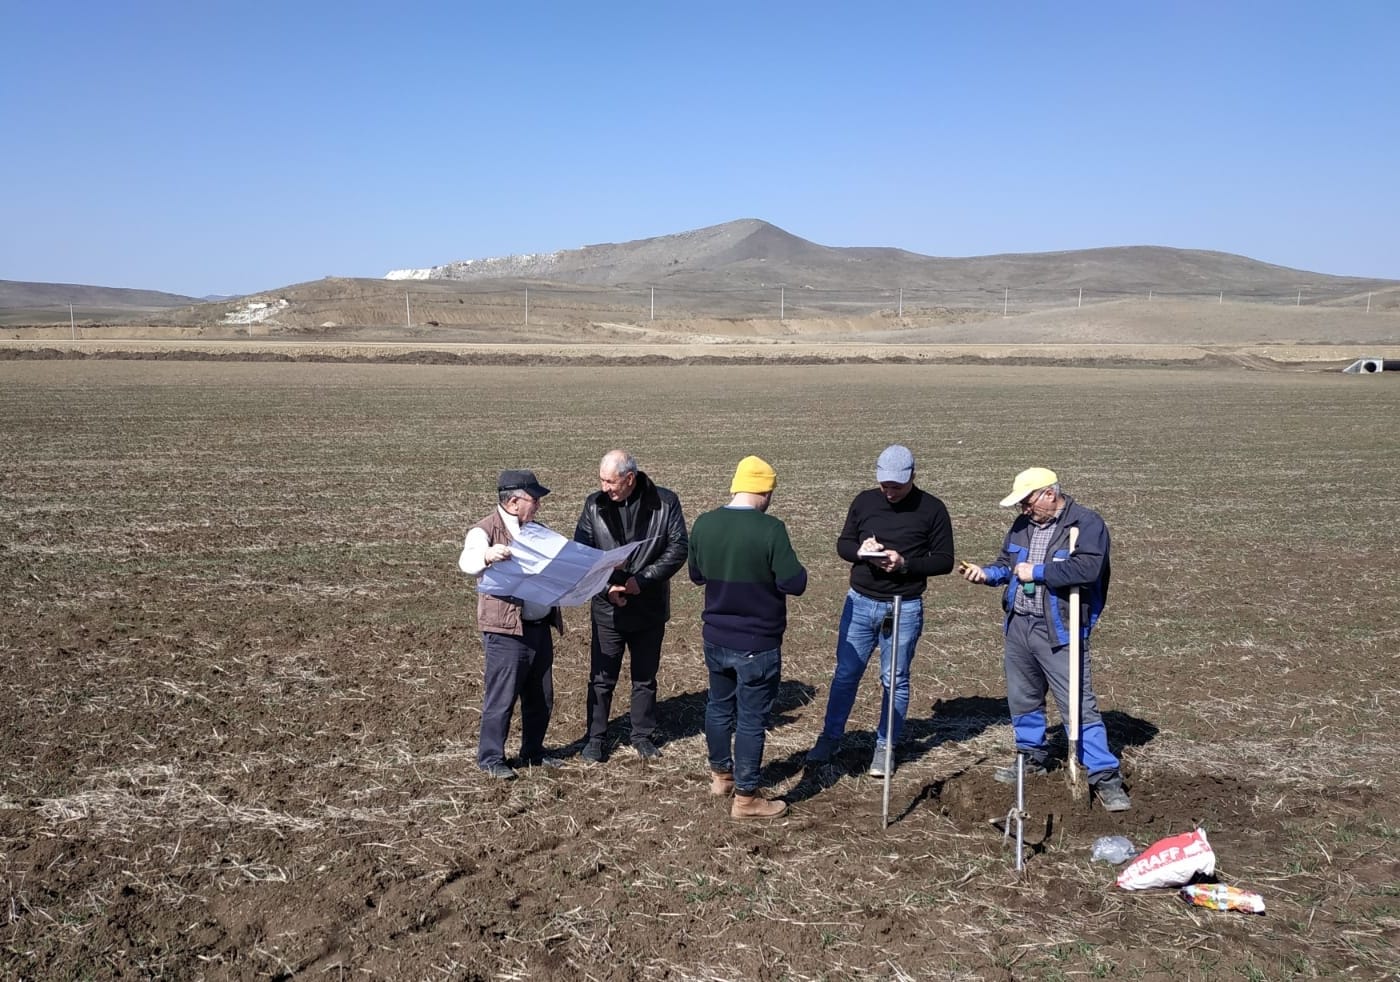 Employees of the Institute of Soil Science and Agrochemistry of the Ministry of Science and Education of the Republic of Azerbaijan visited Fuzuli region for the purpose of implementing the project implemented within the framework of the "Great Return to Karabakh" program.